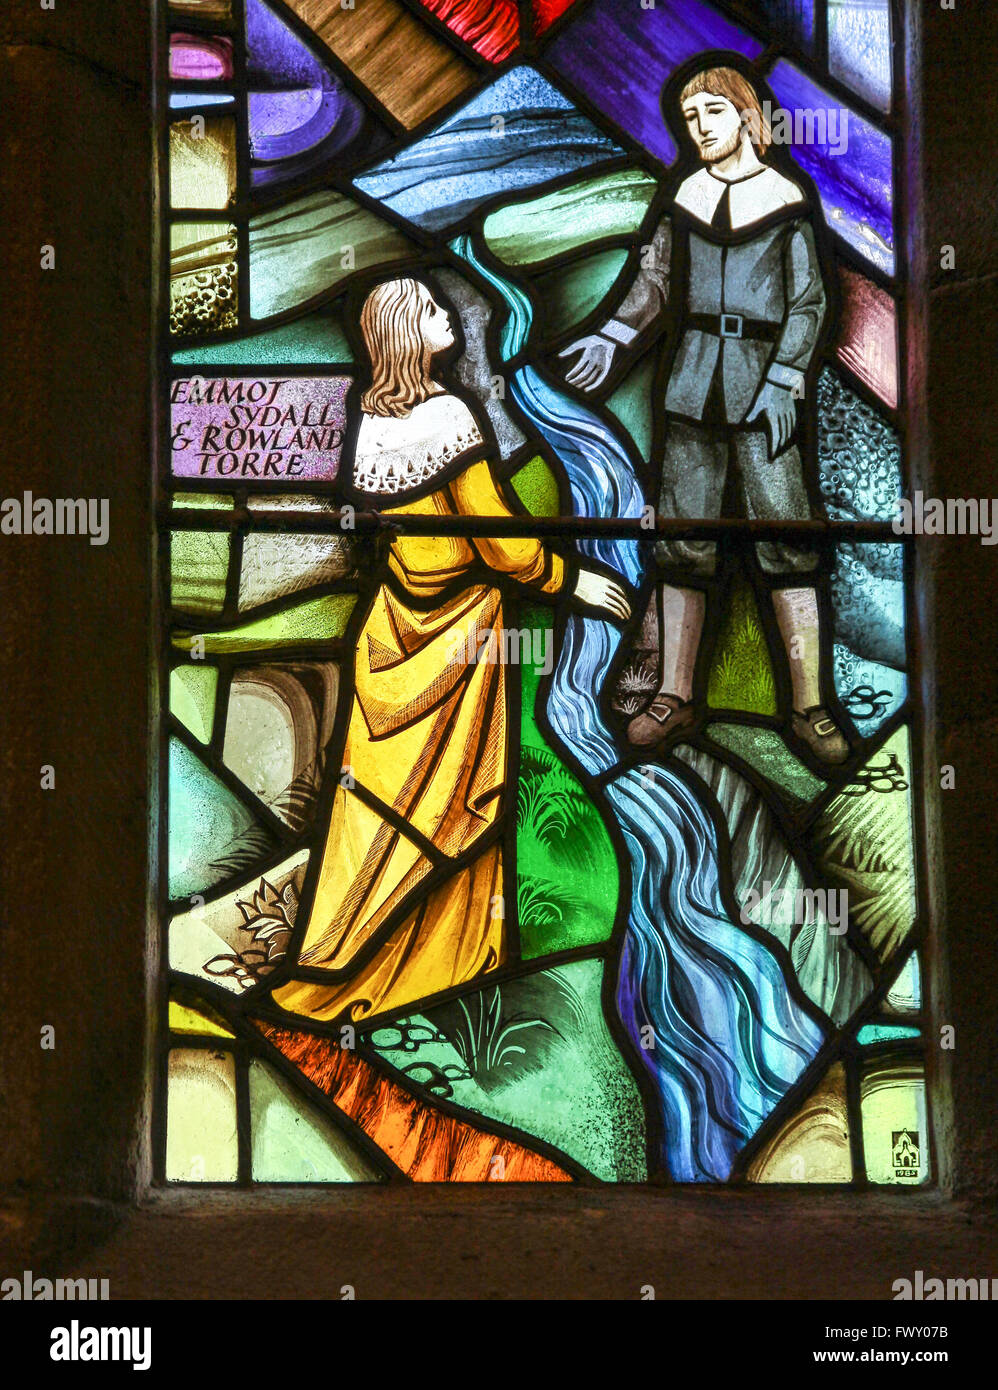 Stained glass window depicting Emmott Sydall and Rowland Torre in St Lawrence’s parish Church Eyam Derbyshire England UK Stock Photo